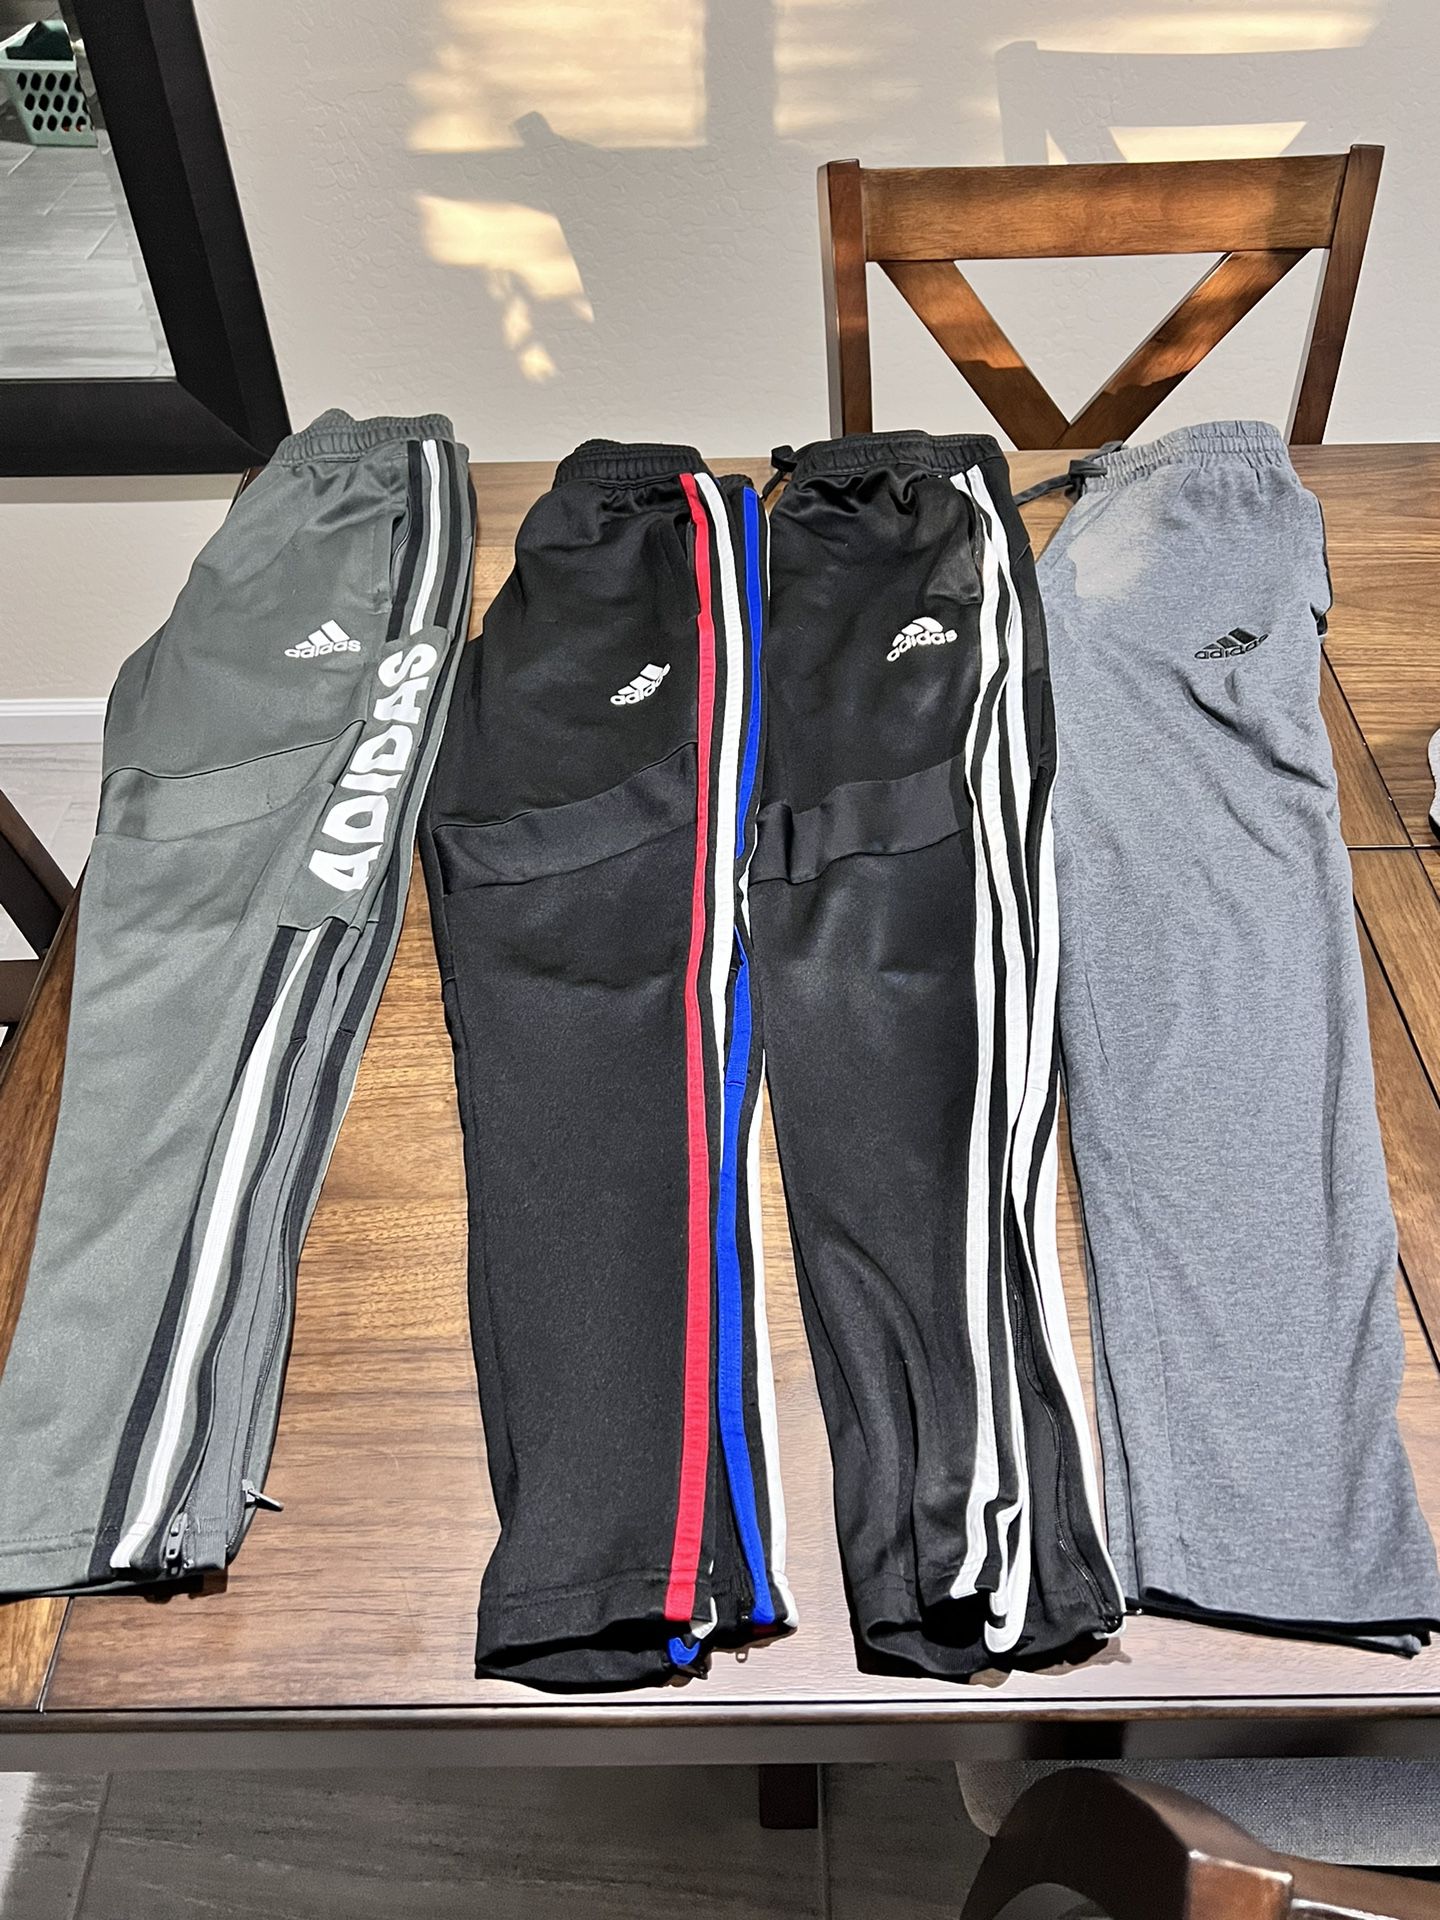 Adidas lot- Size XS-small 4 Pair Of Pants And 2 Pair Of Shorts 